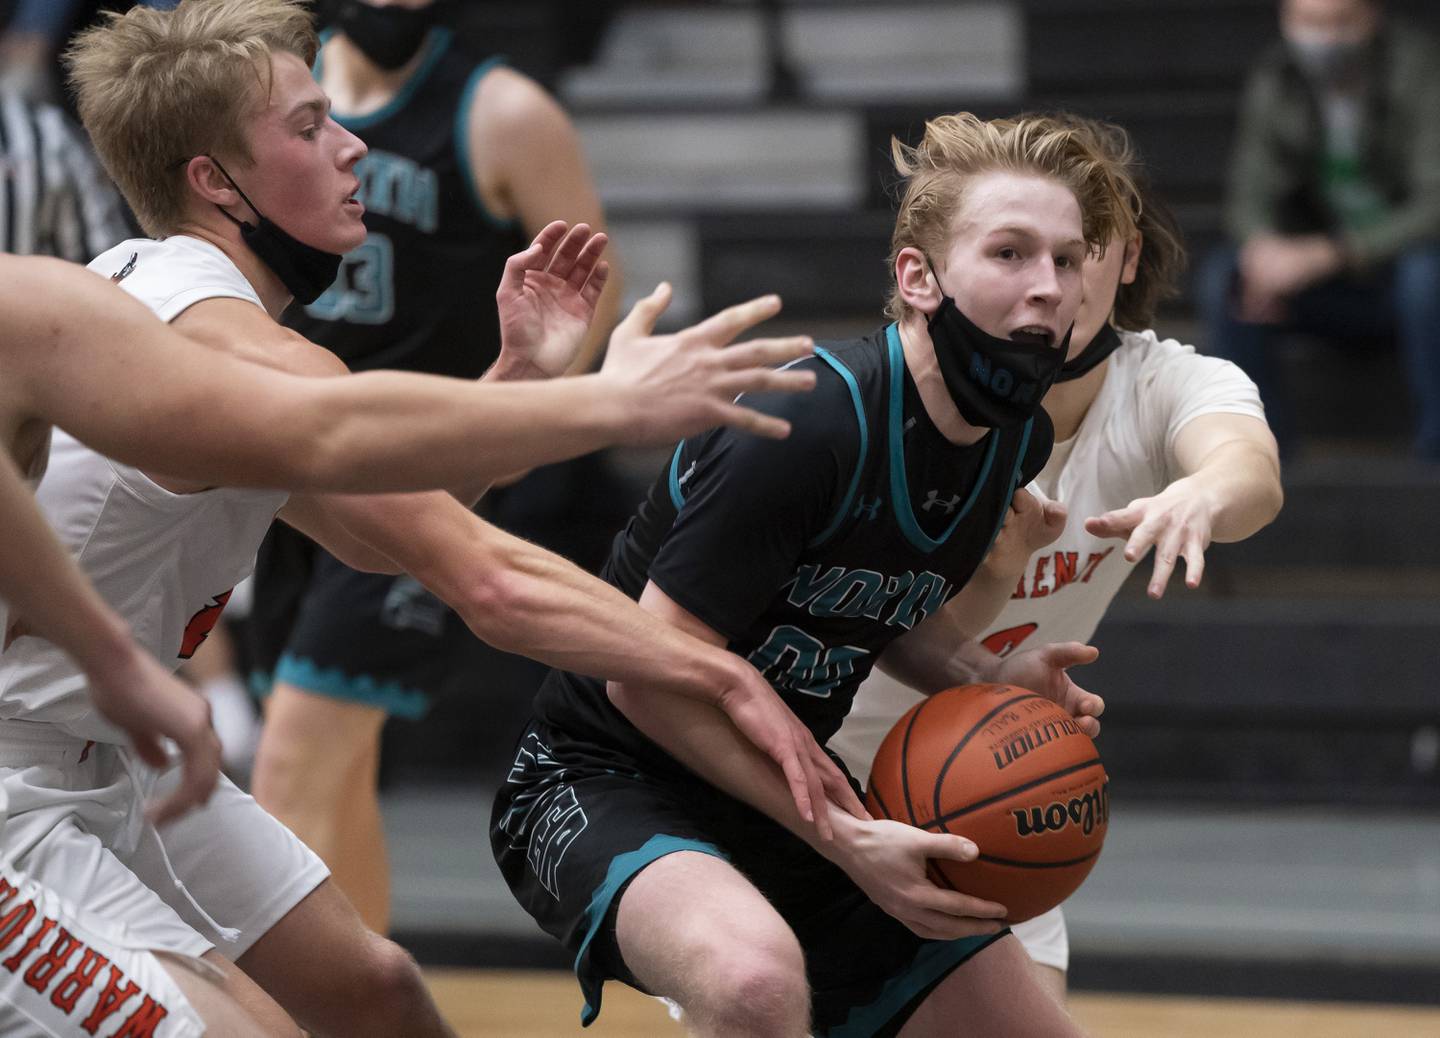 Woodstock North's Rex White (center) is defended by McHenry's Jack Waters (left) and Dillon Maciaszek (right) during the Woodstock North vs. McHenry boys basketball game on Saturday, December 4, 2021 at McHenry High School. McHenry won in overtime 58-52. Ryan Rayburn for Shaw Local